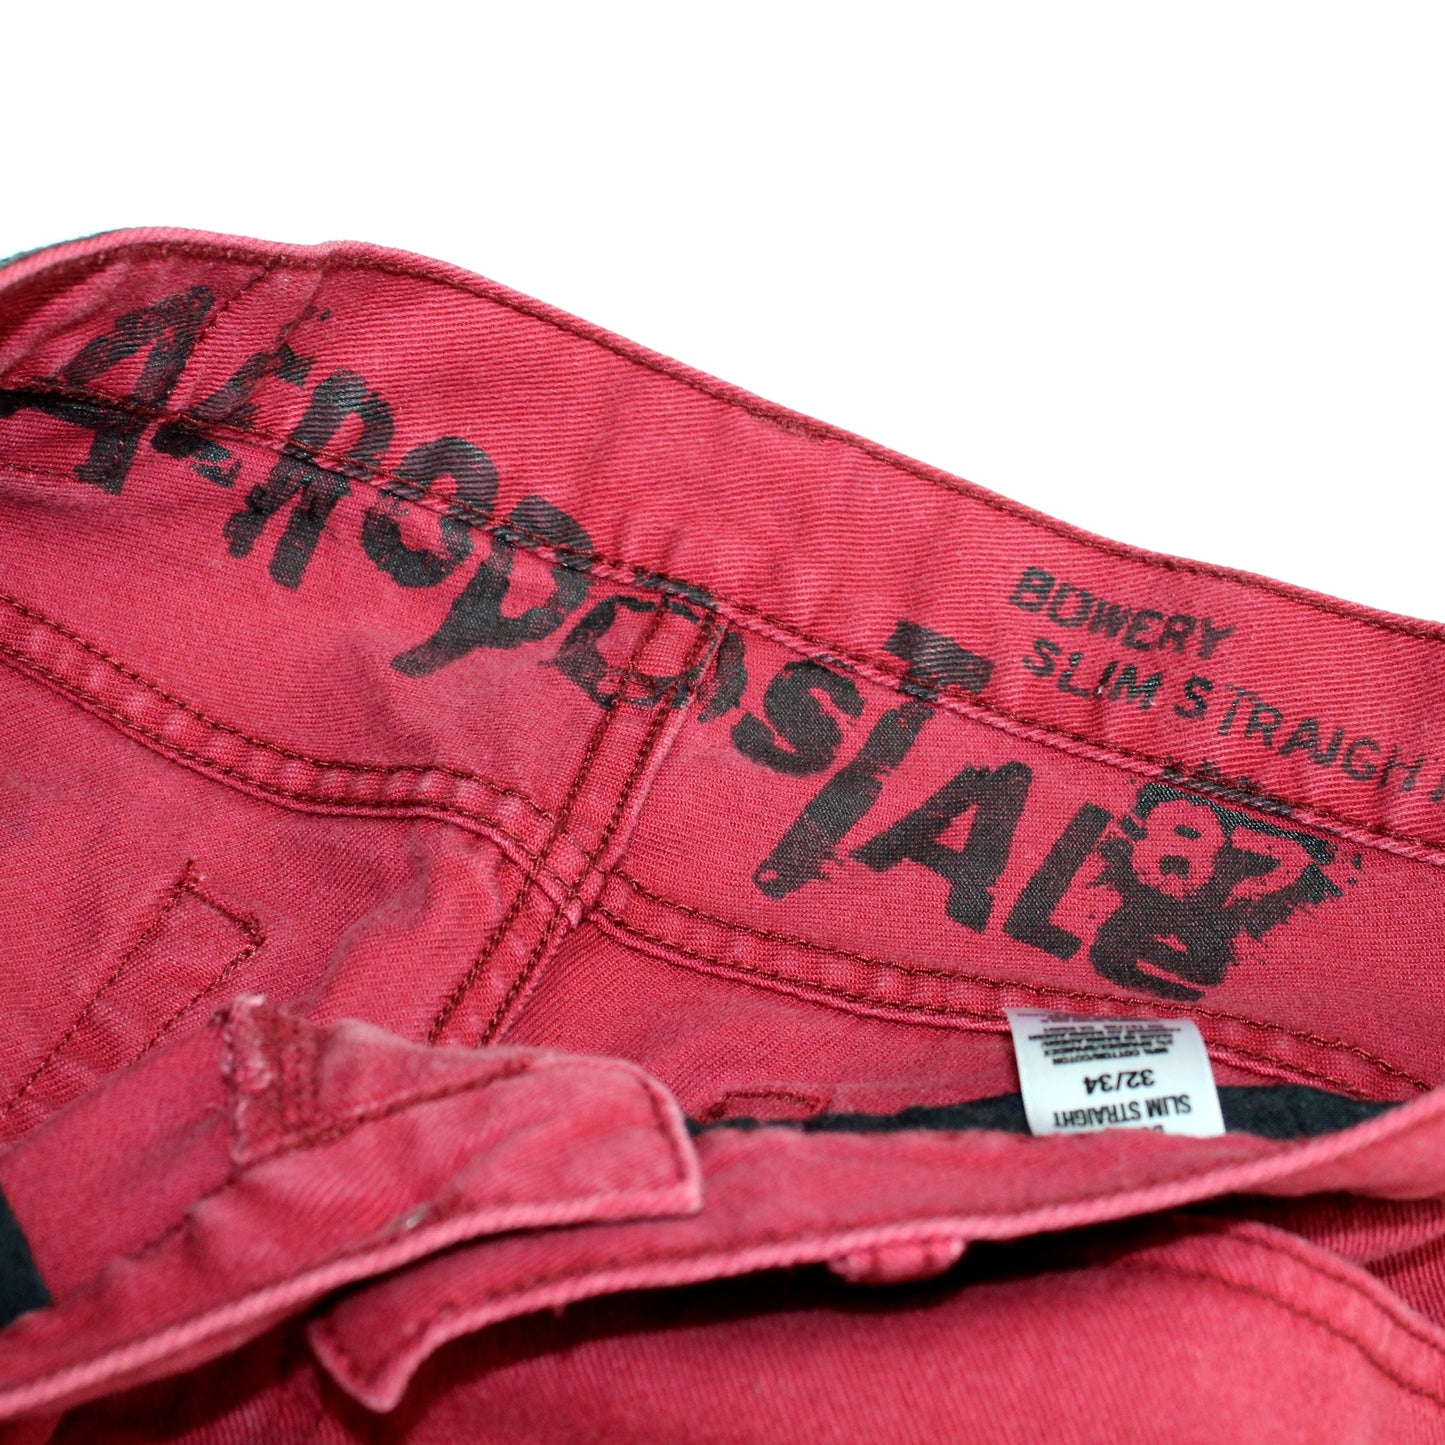 Aeropostale Bowery Vintage Slim Straight Jeans Red Cotton 98% Spandex 2% Size 32/34 all tags marks remain intact